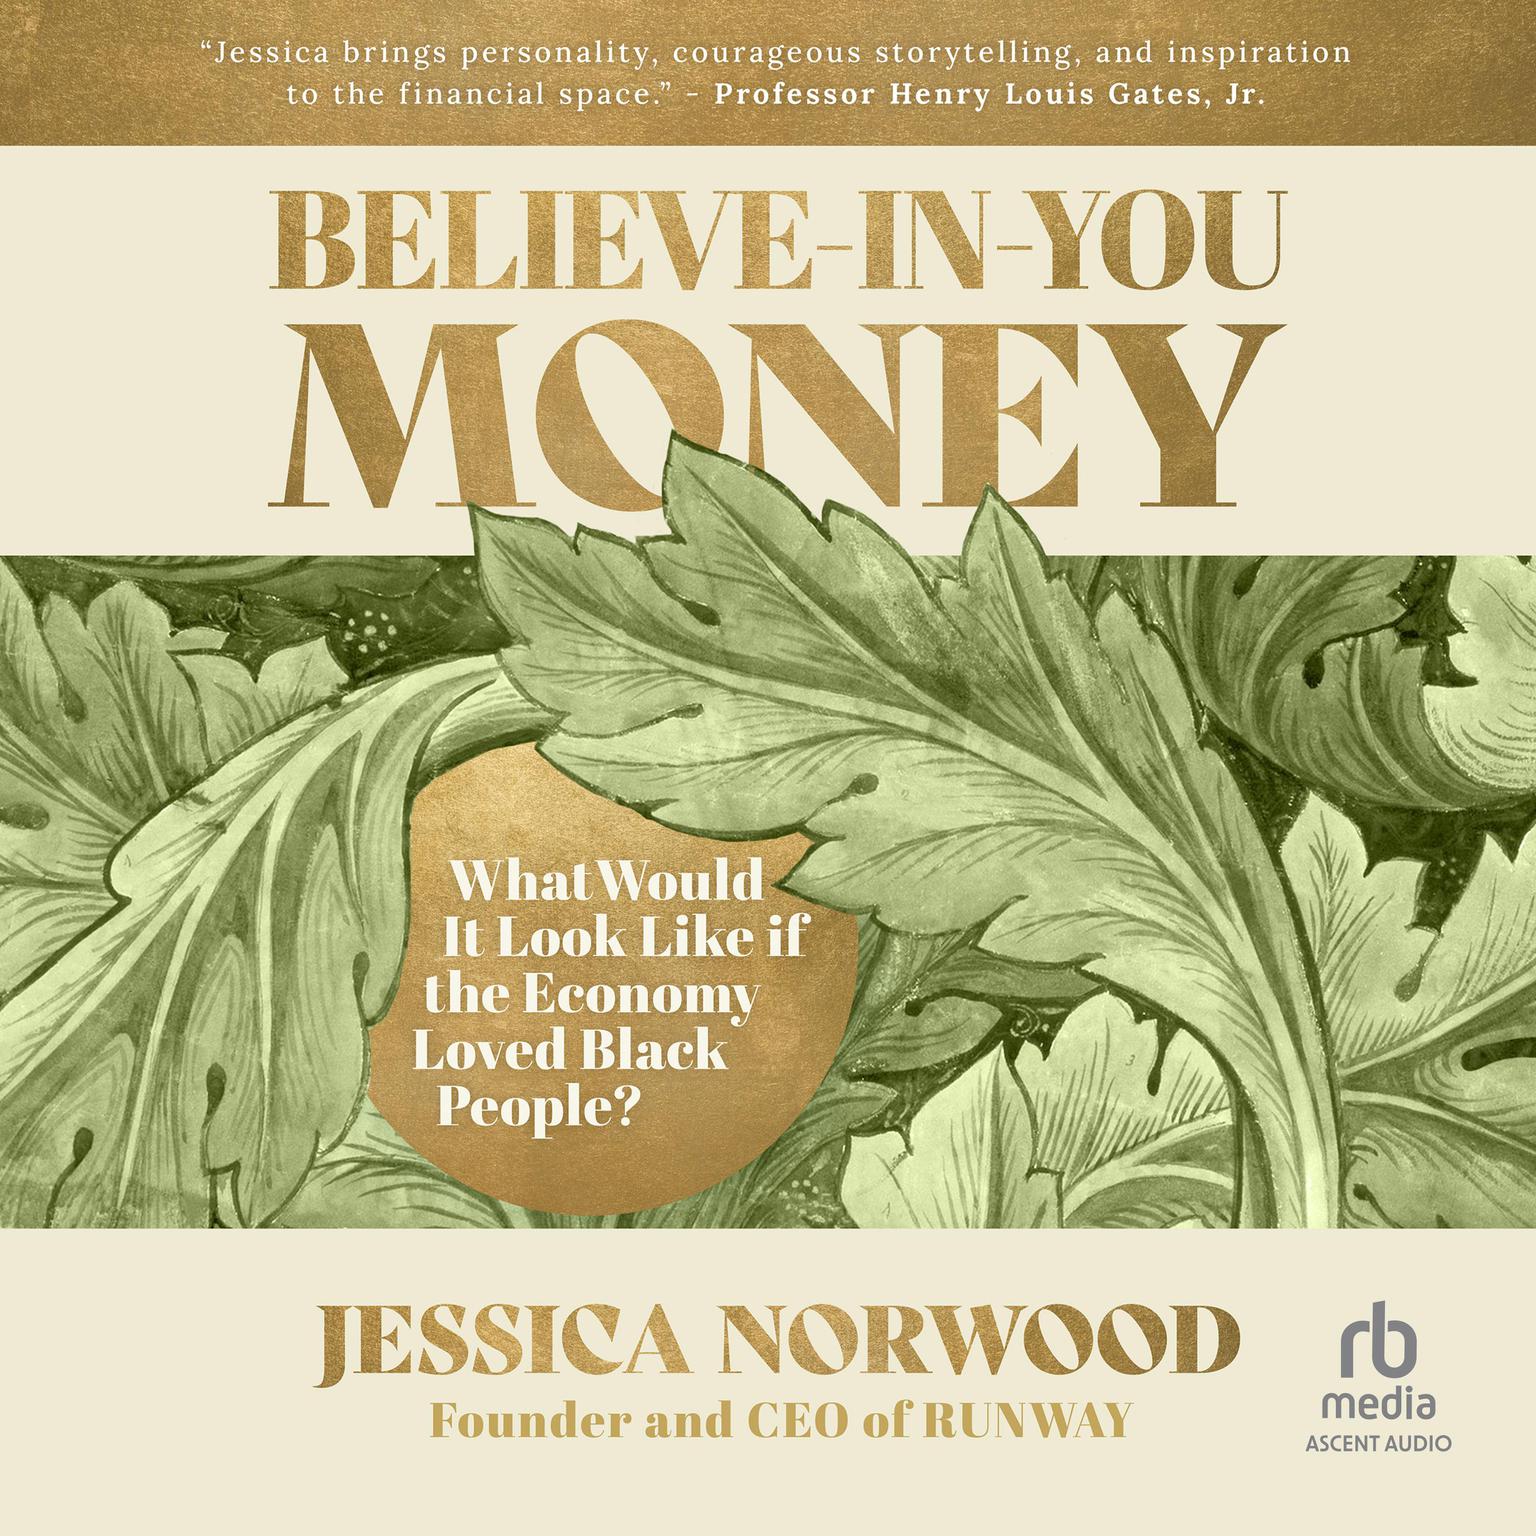 Believe-In-You Money: What Would It Look Like If the Economy Loved Black People? Audiobook, by Jessica Norwood